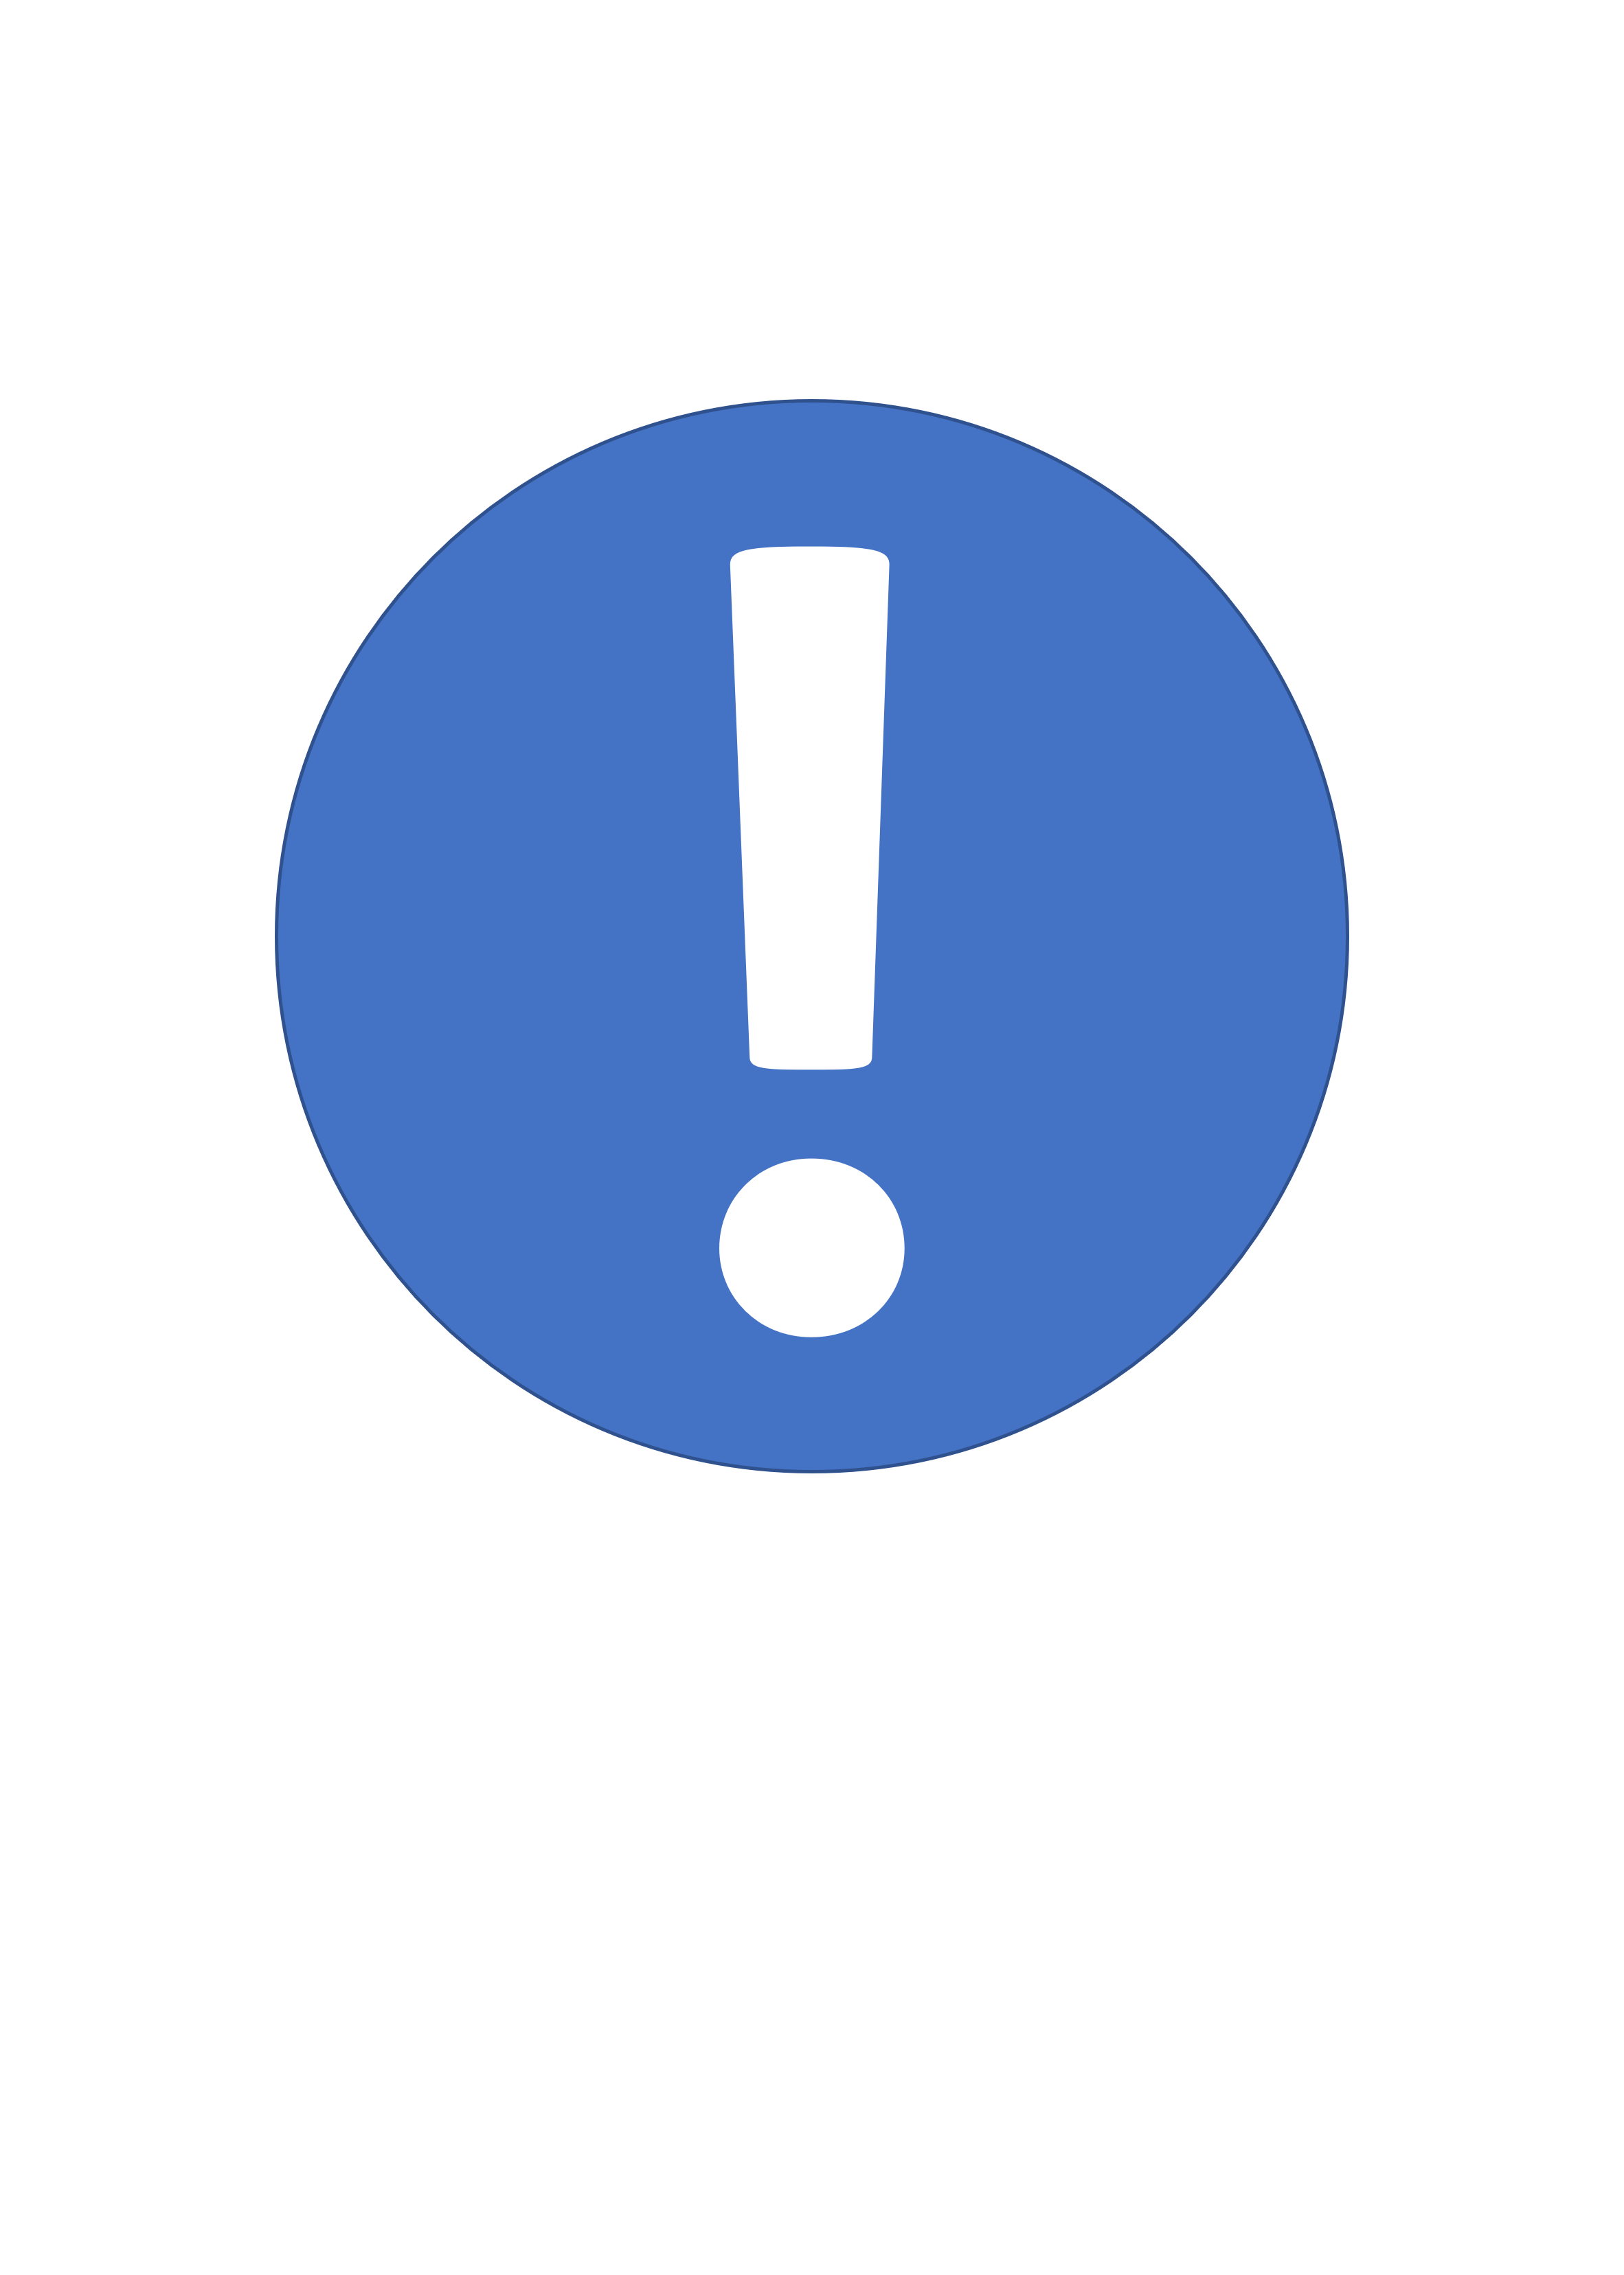 A blue circle with a white exclamation mark inside it